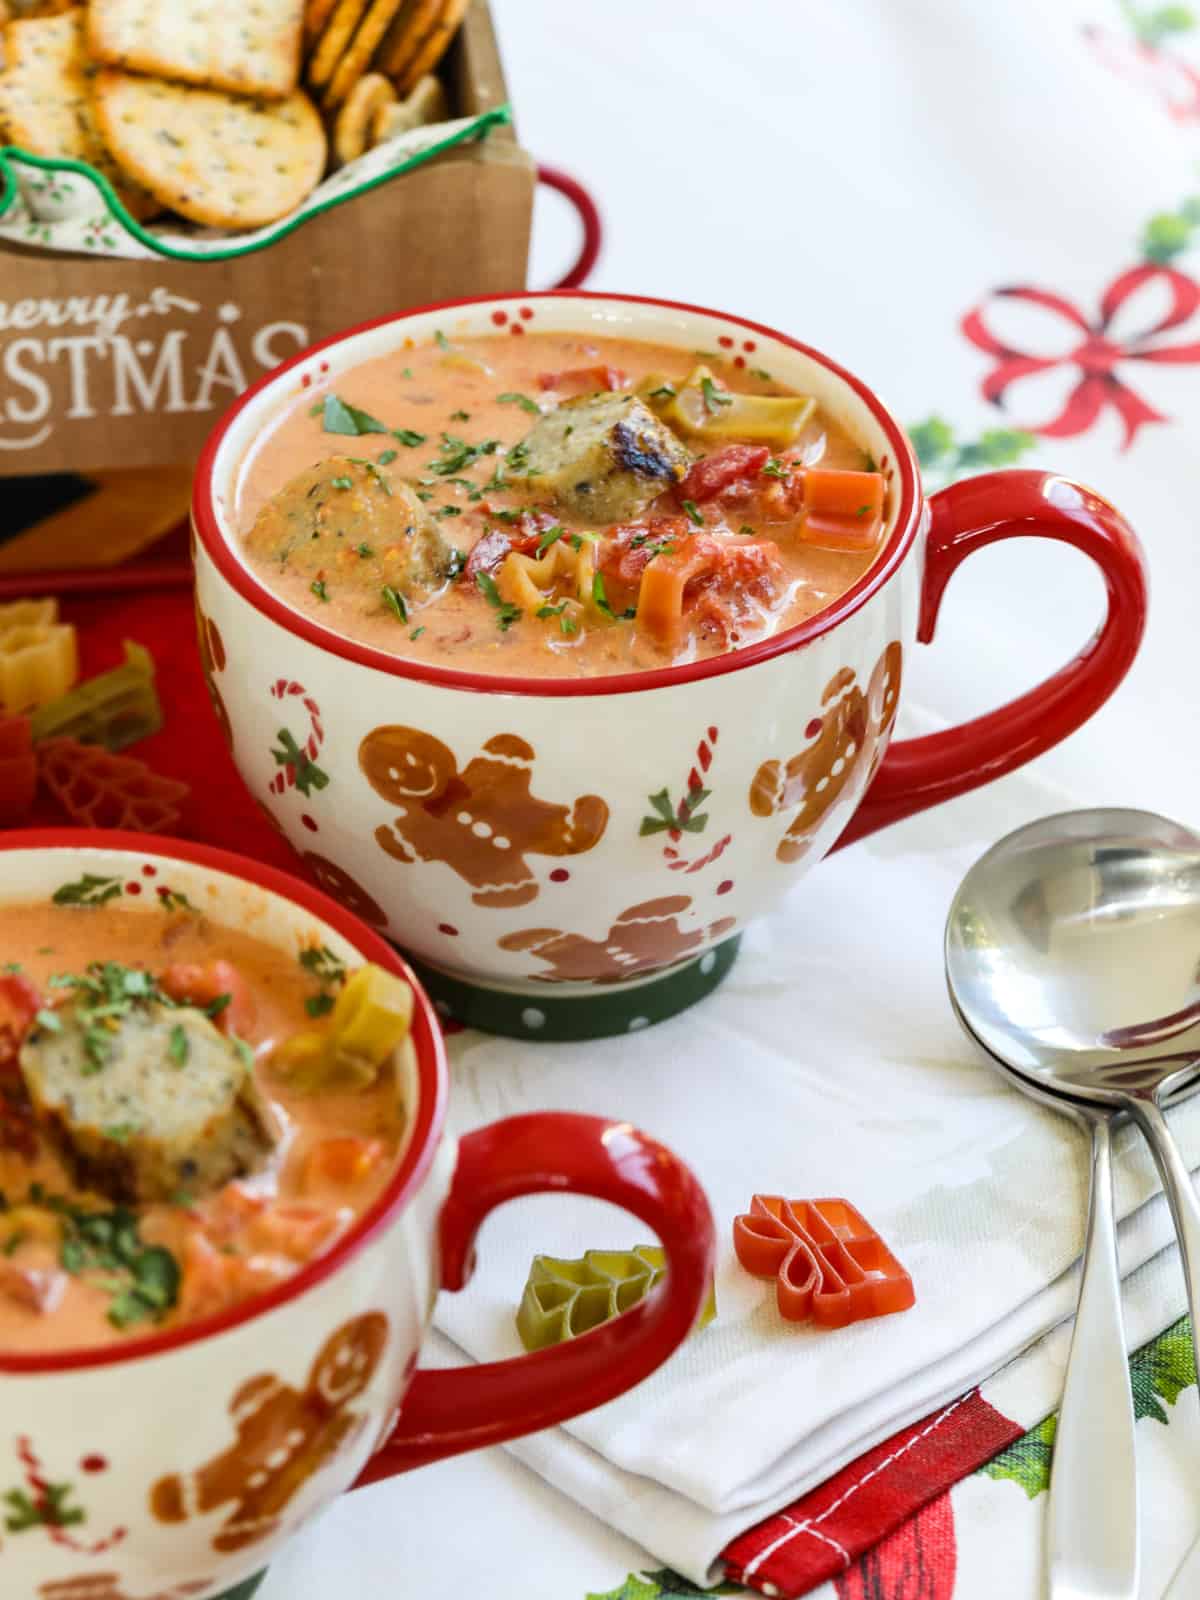 https://www.delicioustable.com/wp-content/uploads/2022/12/Mugs-of-Christmas-Soup.jpg